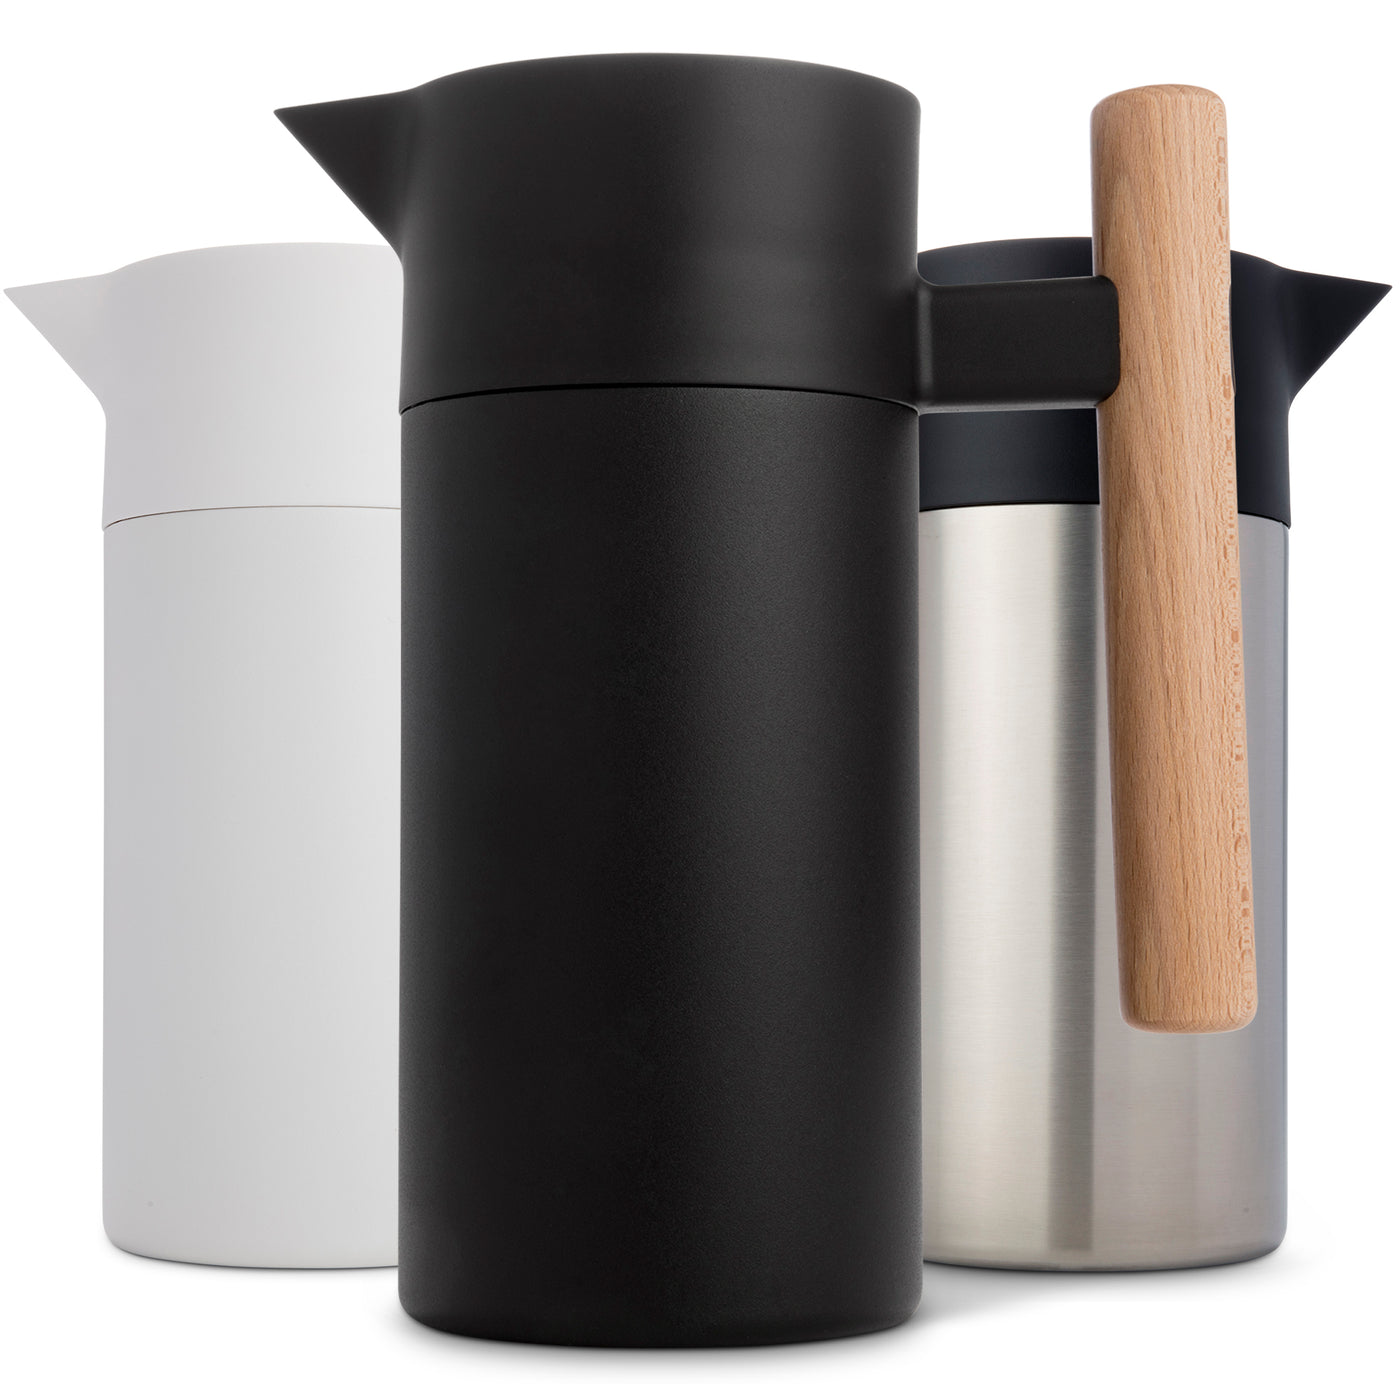 Beverage Carafe — The Amend collective